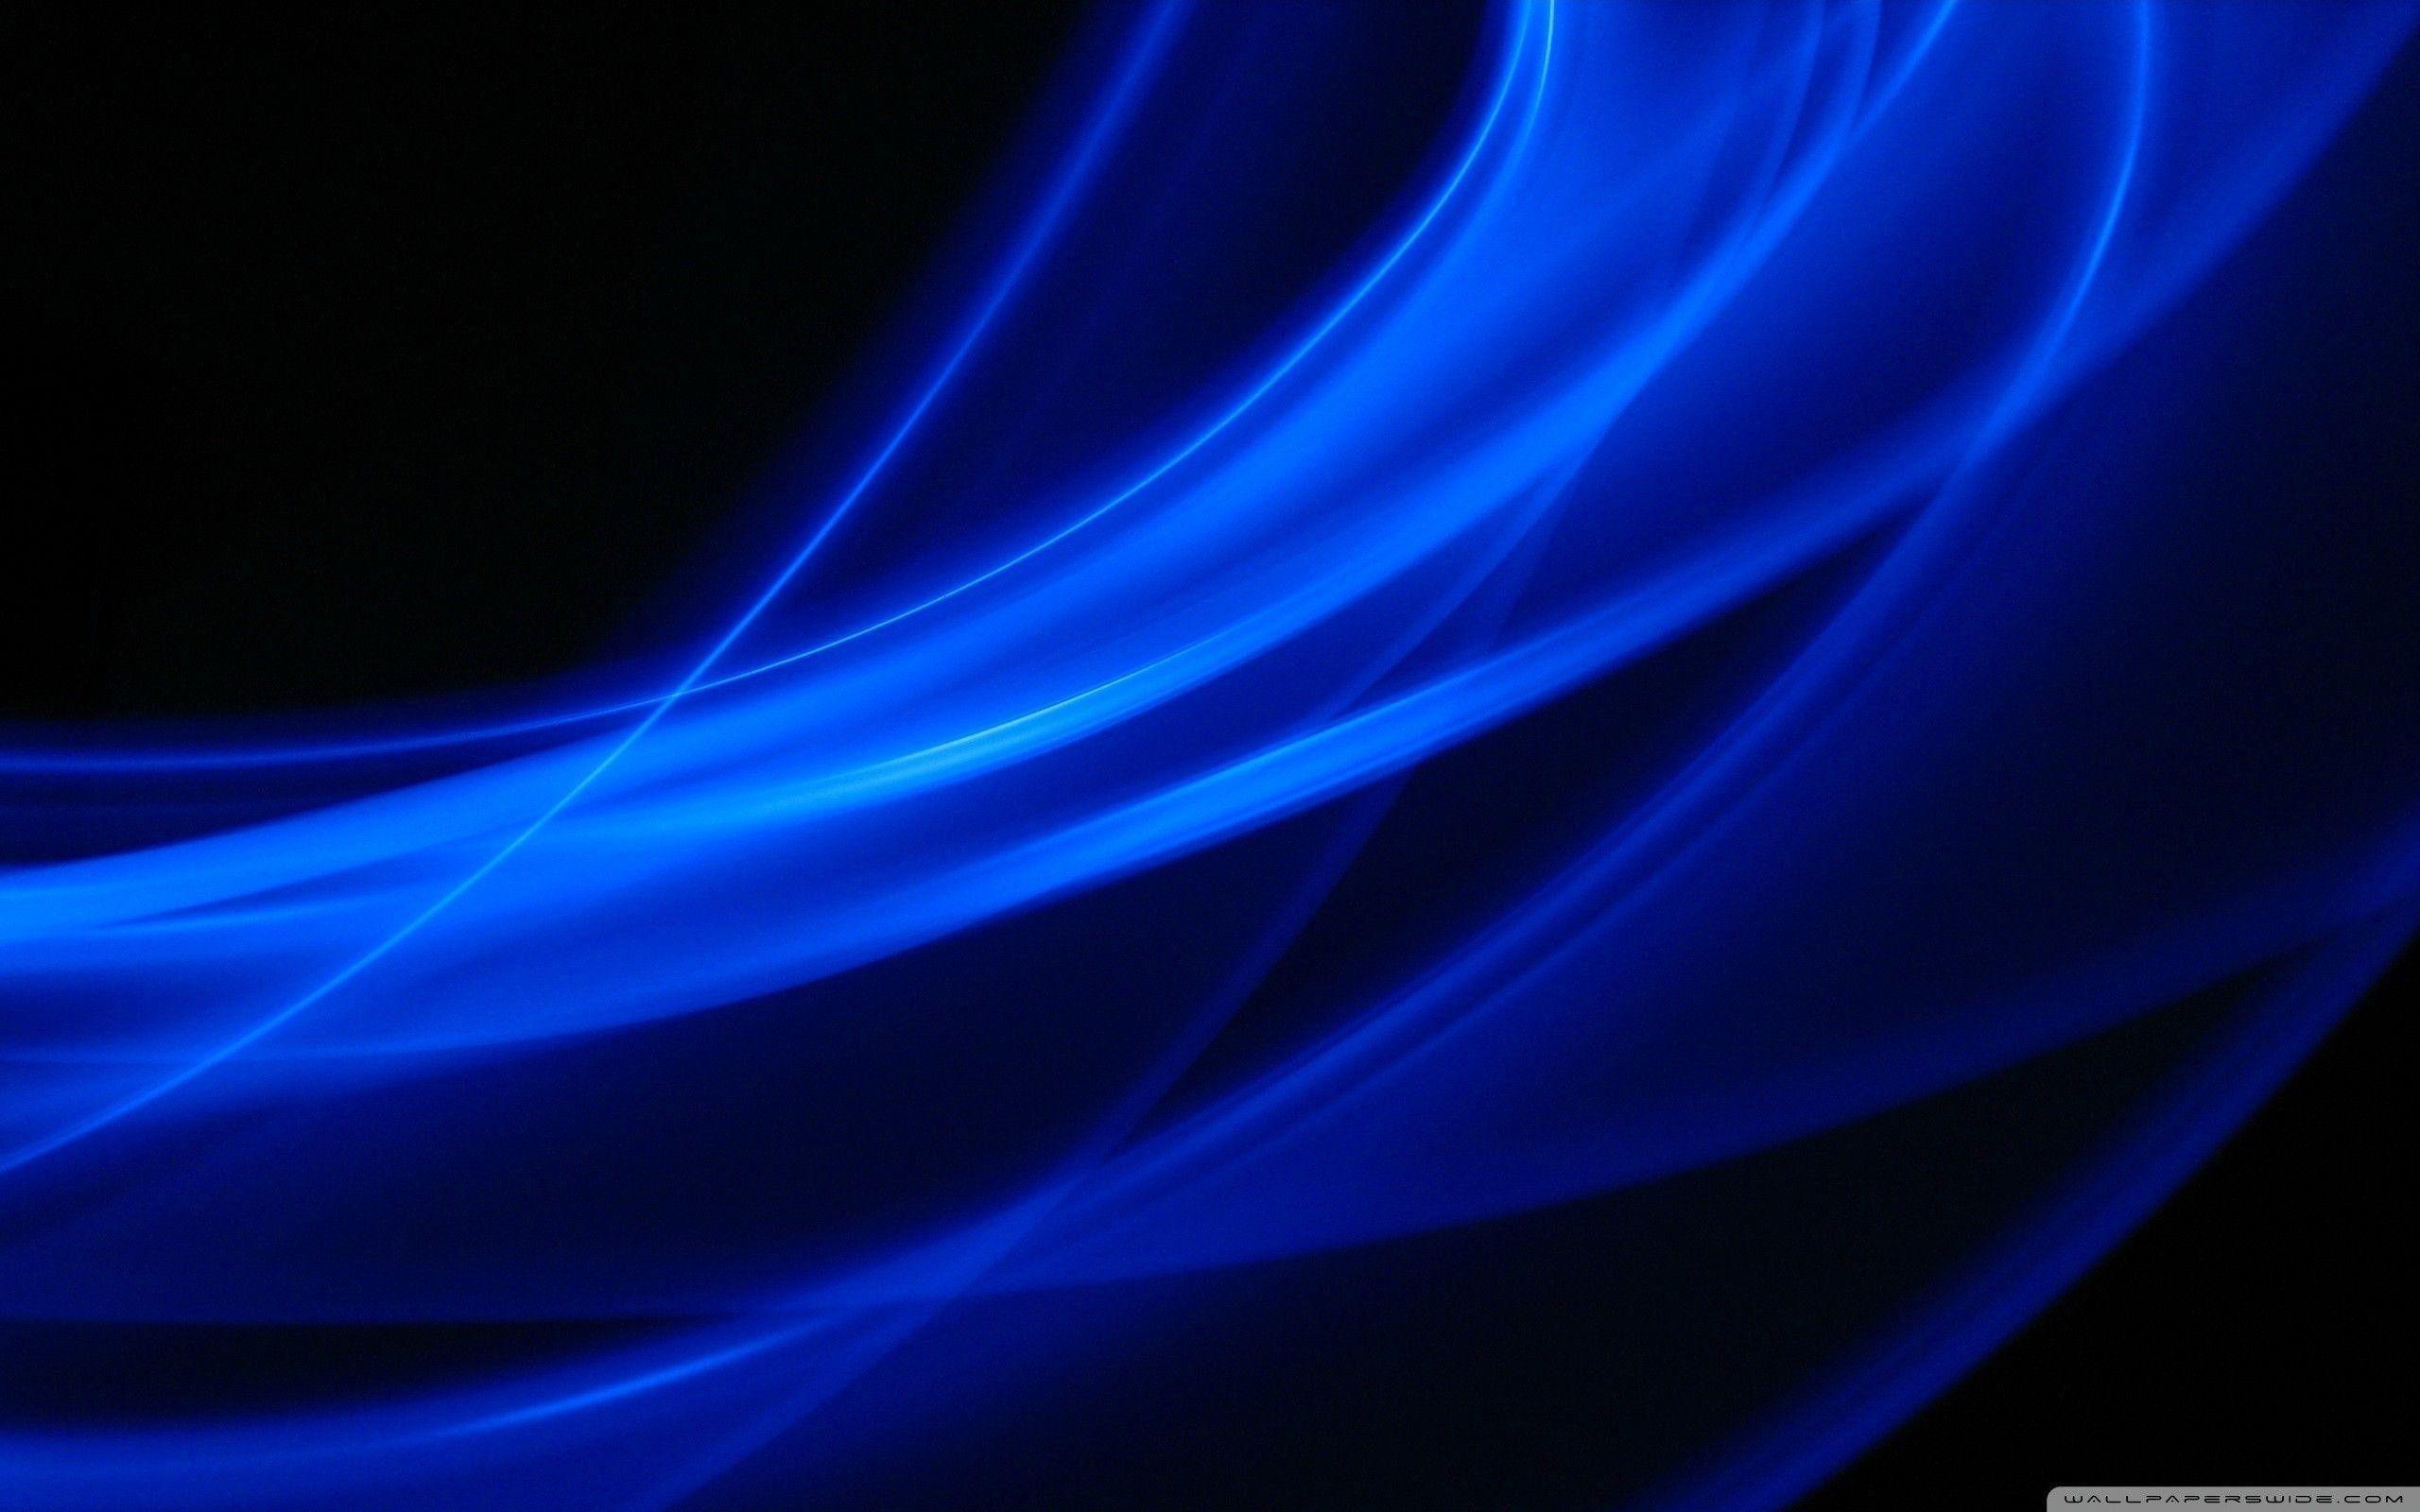 Electric Blue Wallpapers Top Free Electric Blue Backgrounds Wallpaperaccess Hd to 4k quality images in our collection, all free for download! electric blue wallpapers top free